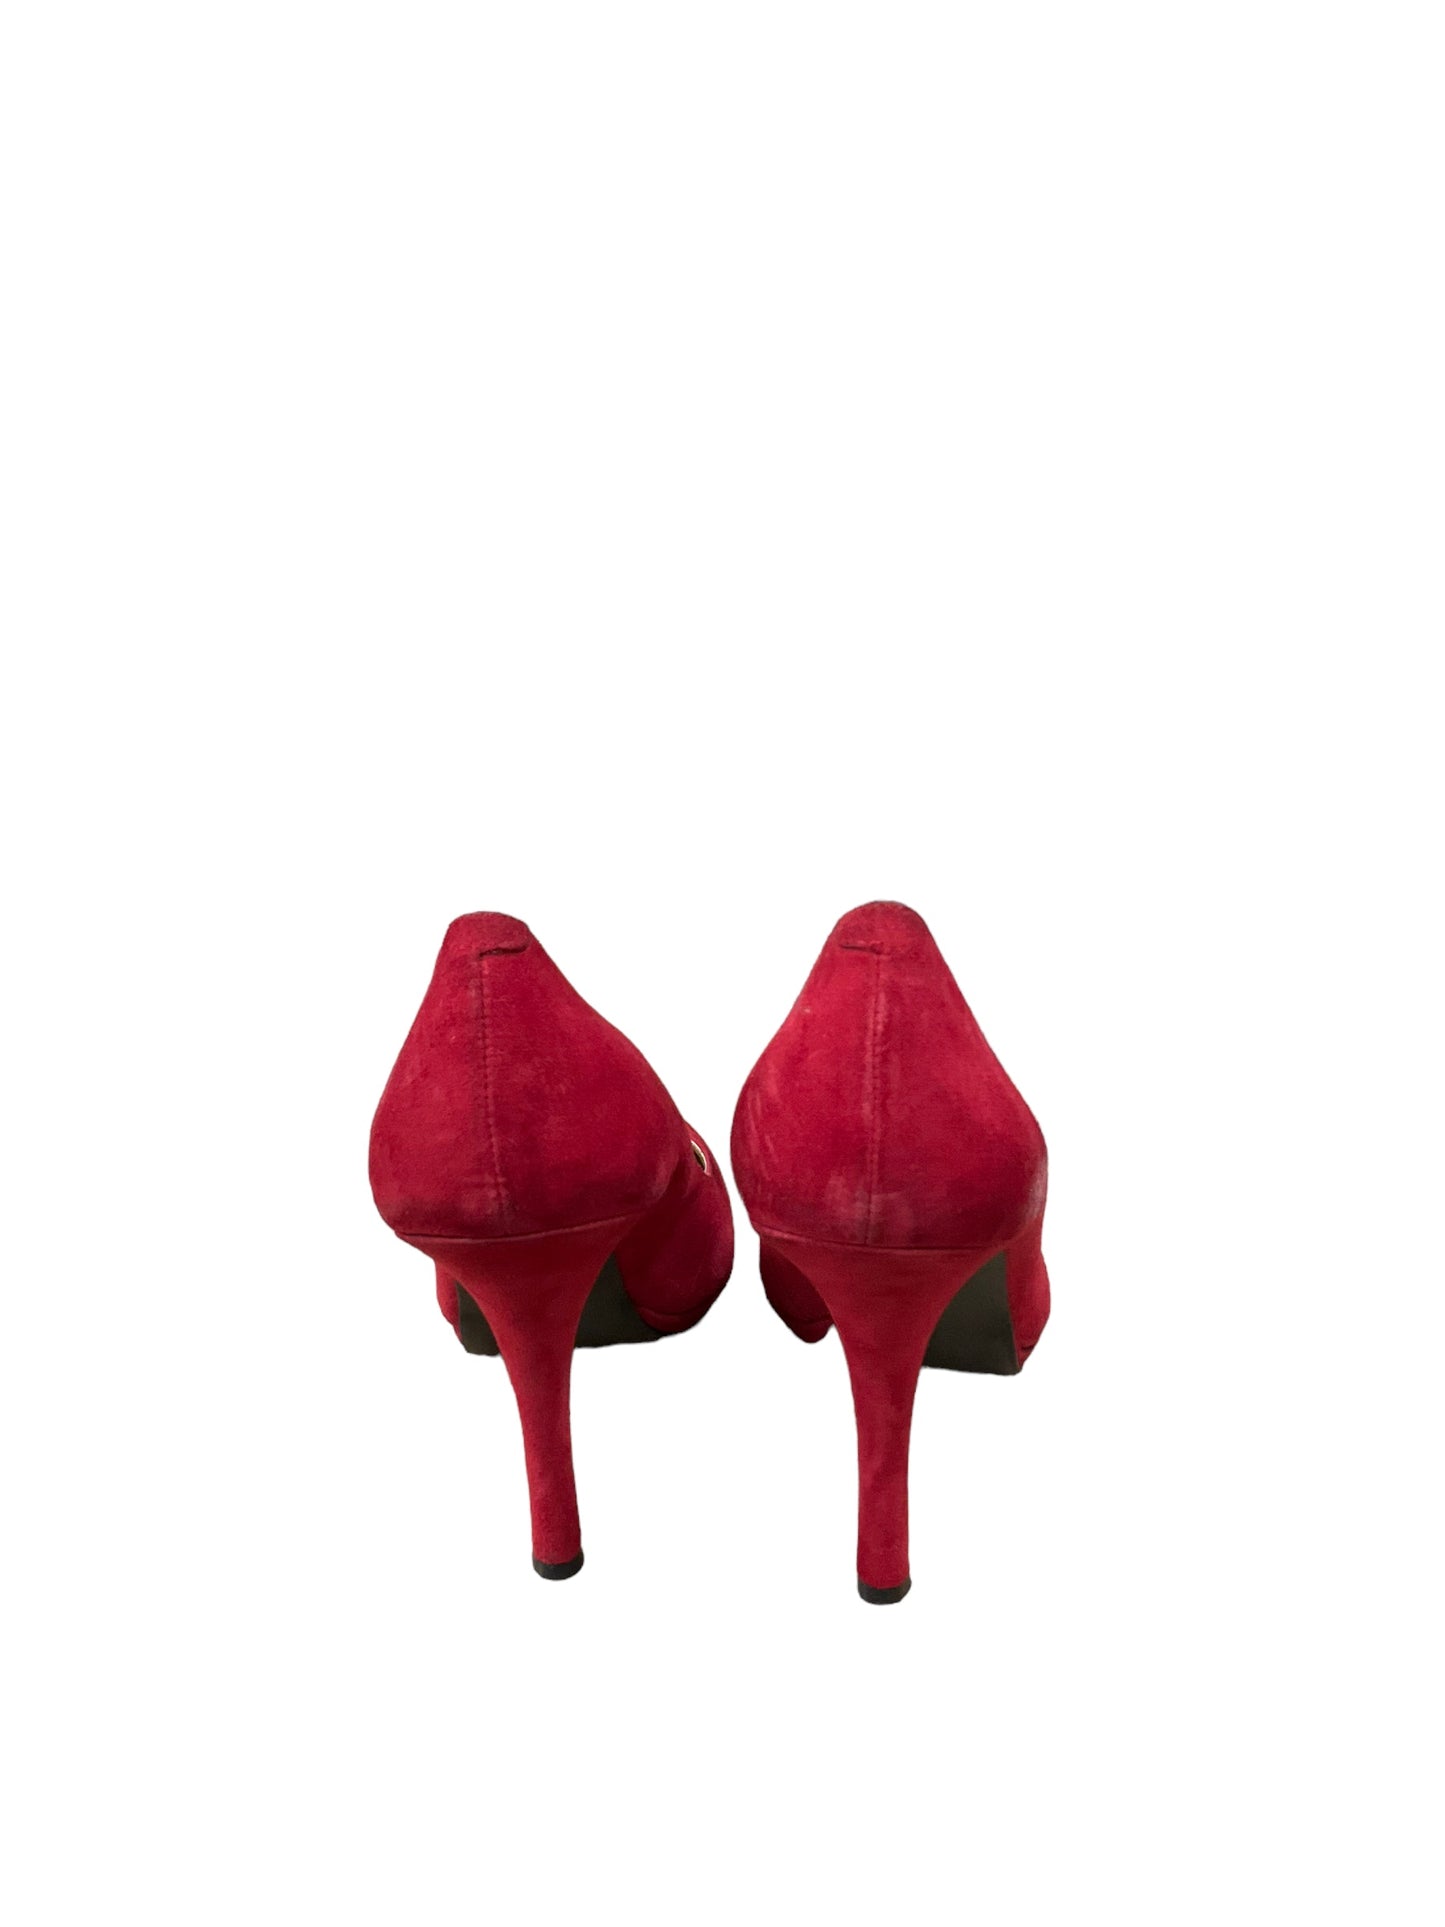 Shoes Heels Stiletto By Sole Society  Size: 11